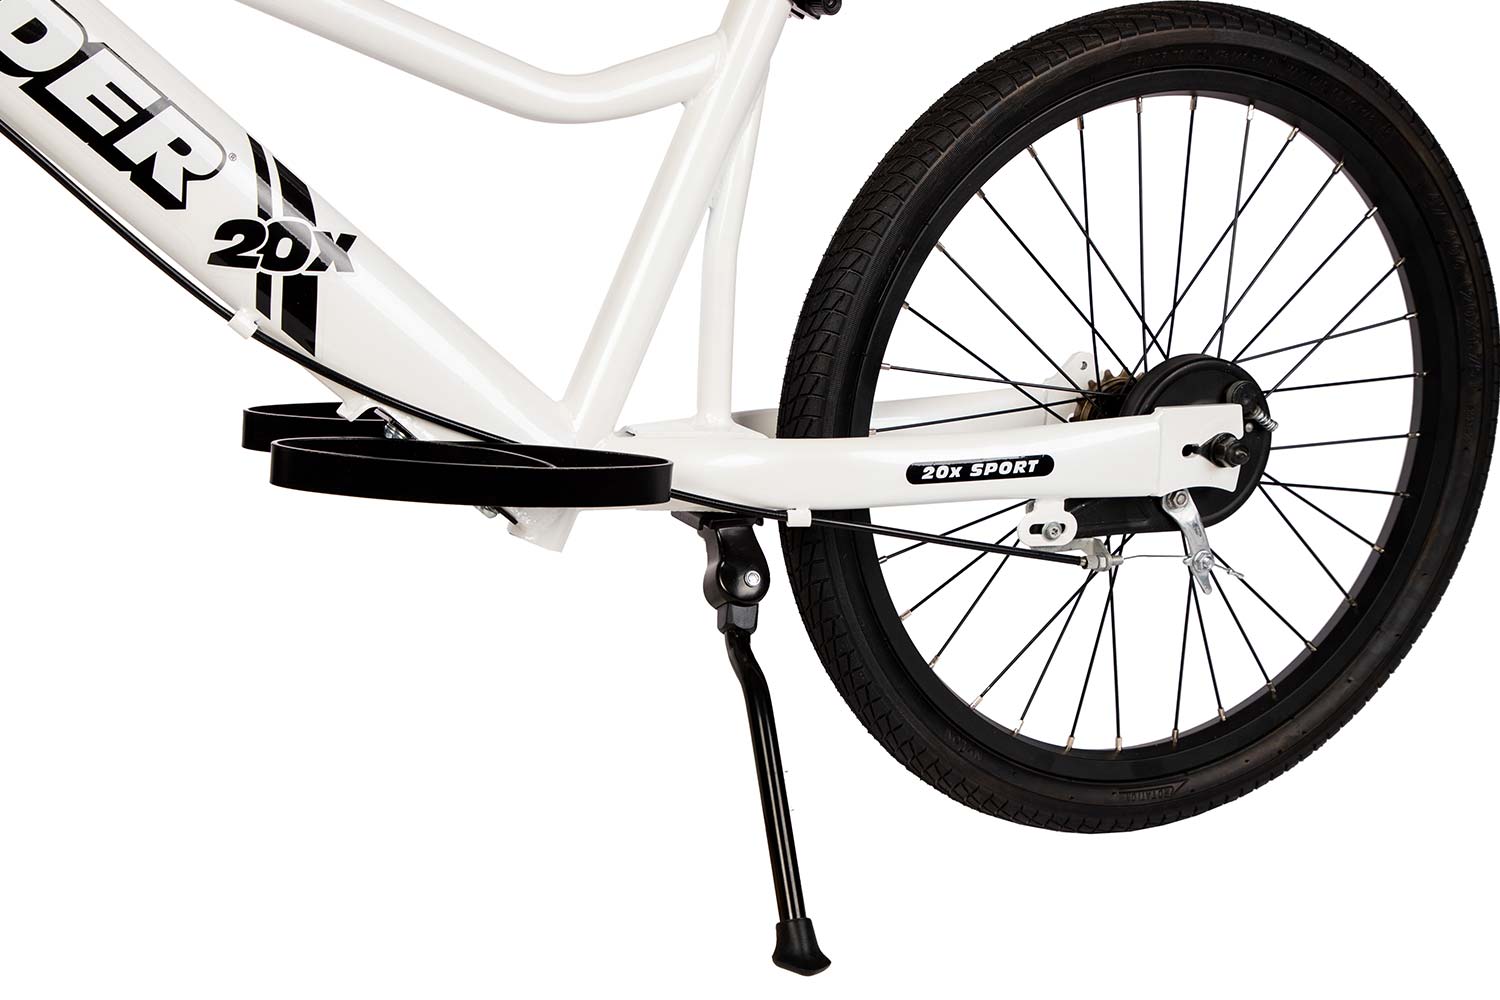 A studio detail of the built-in kickstand on the Strider 20x Sport, a 20" all-in-one balance and pedal bike